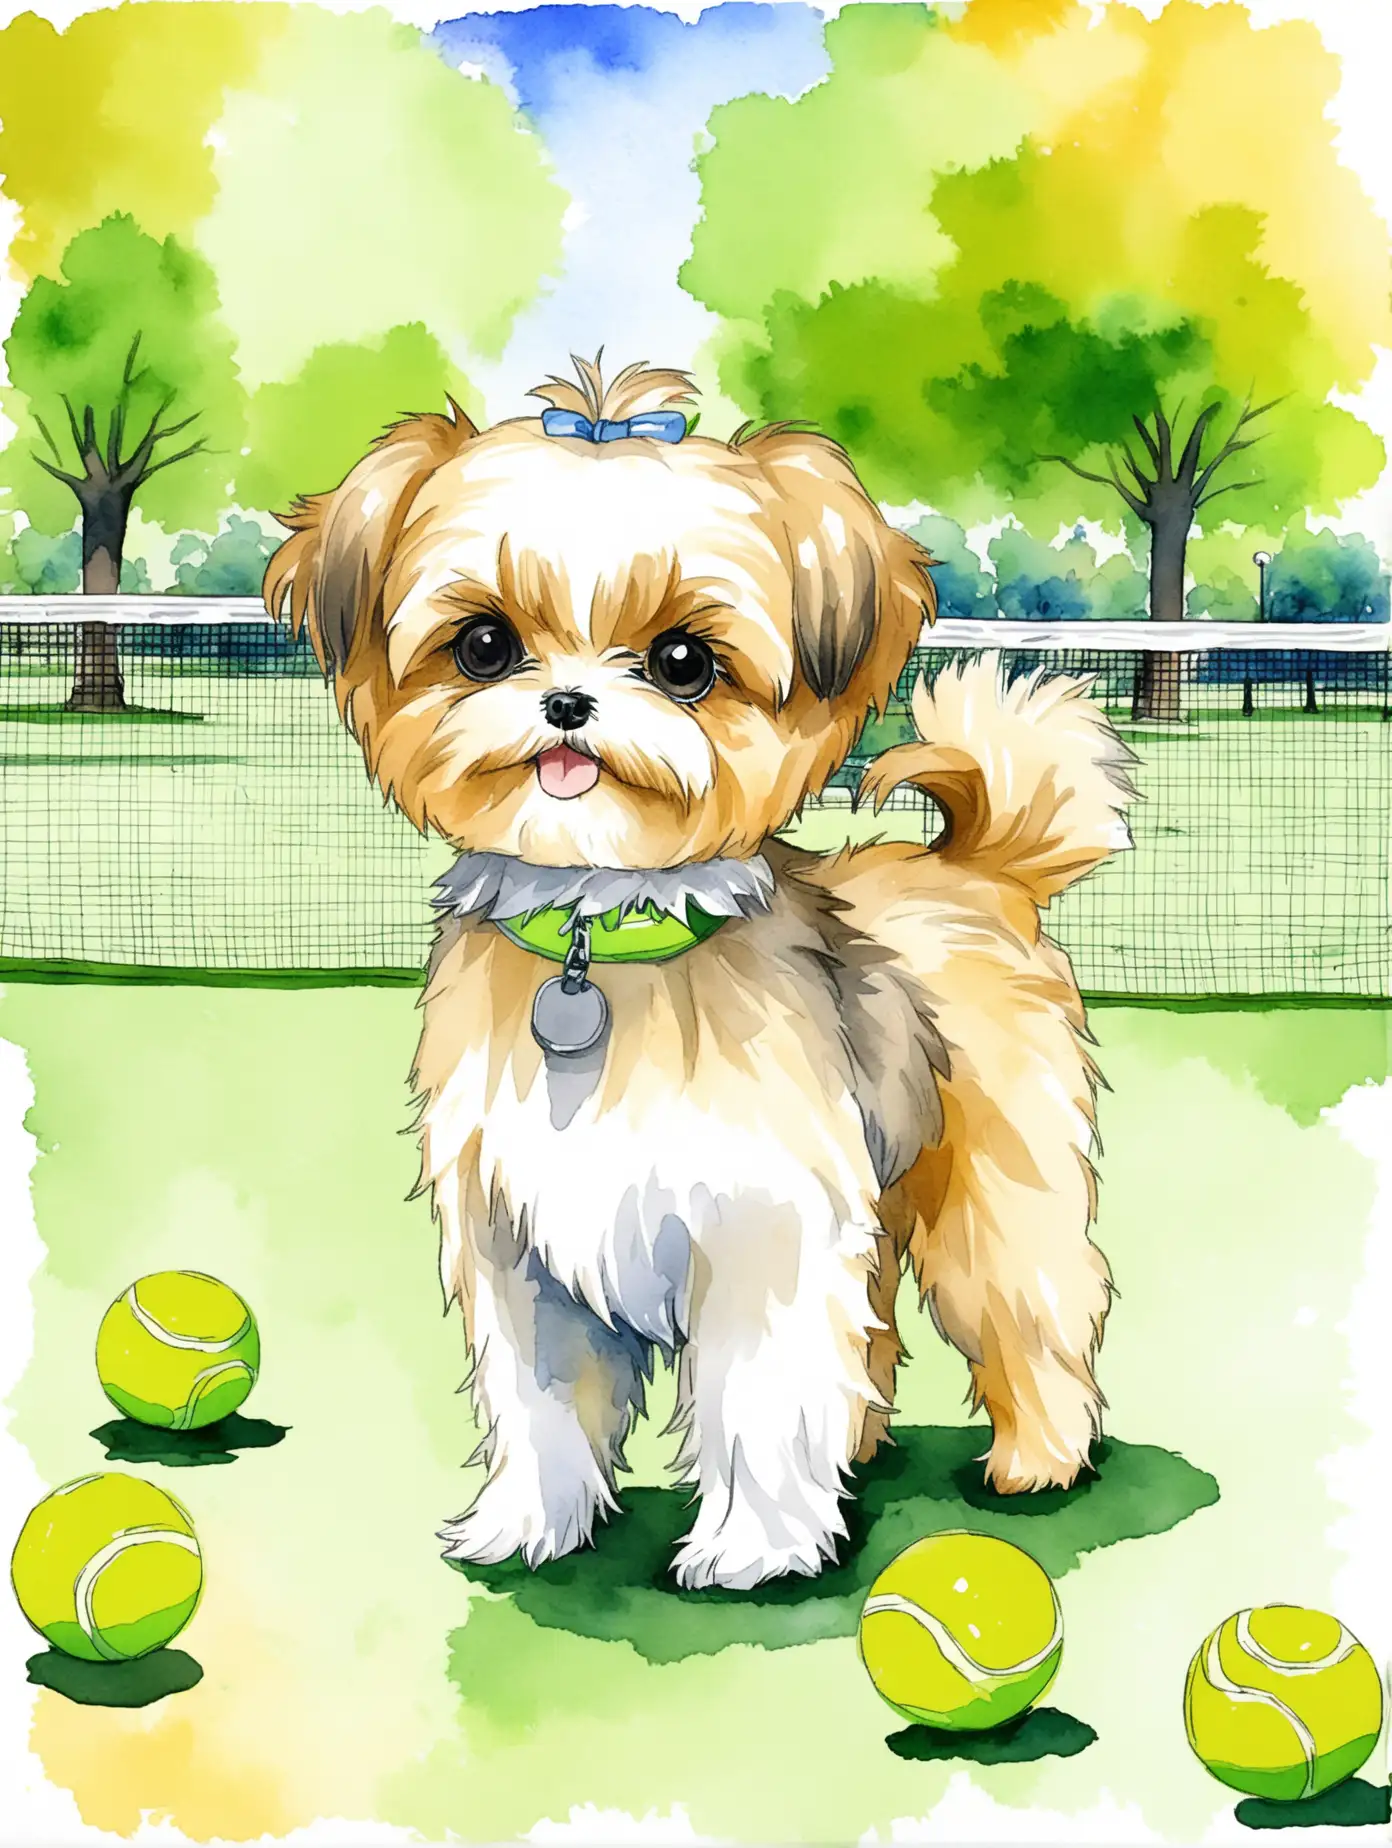 An anime style of cream colored shorkie with green tennis balls standing in a park in watercolor